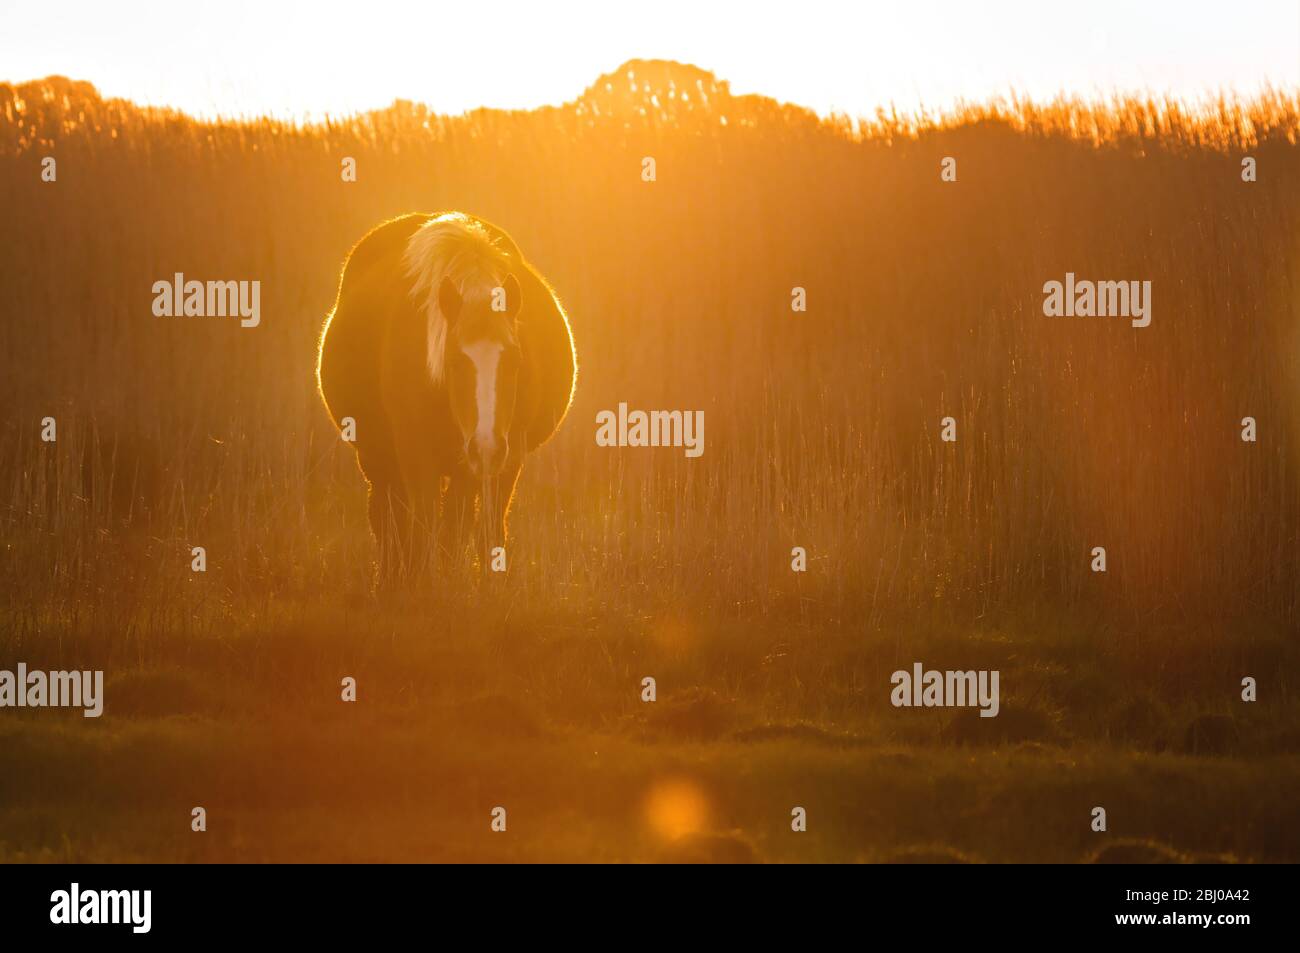 Backlit New Forest Pony Bathed In Golden Light Walking Towards The Camera At Sunrise On A Salt Marsh With Reeds Beds In The Background. Stock Photo